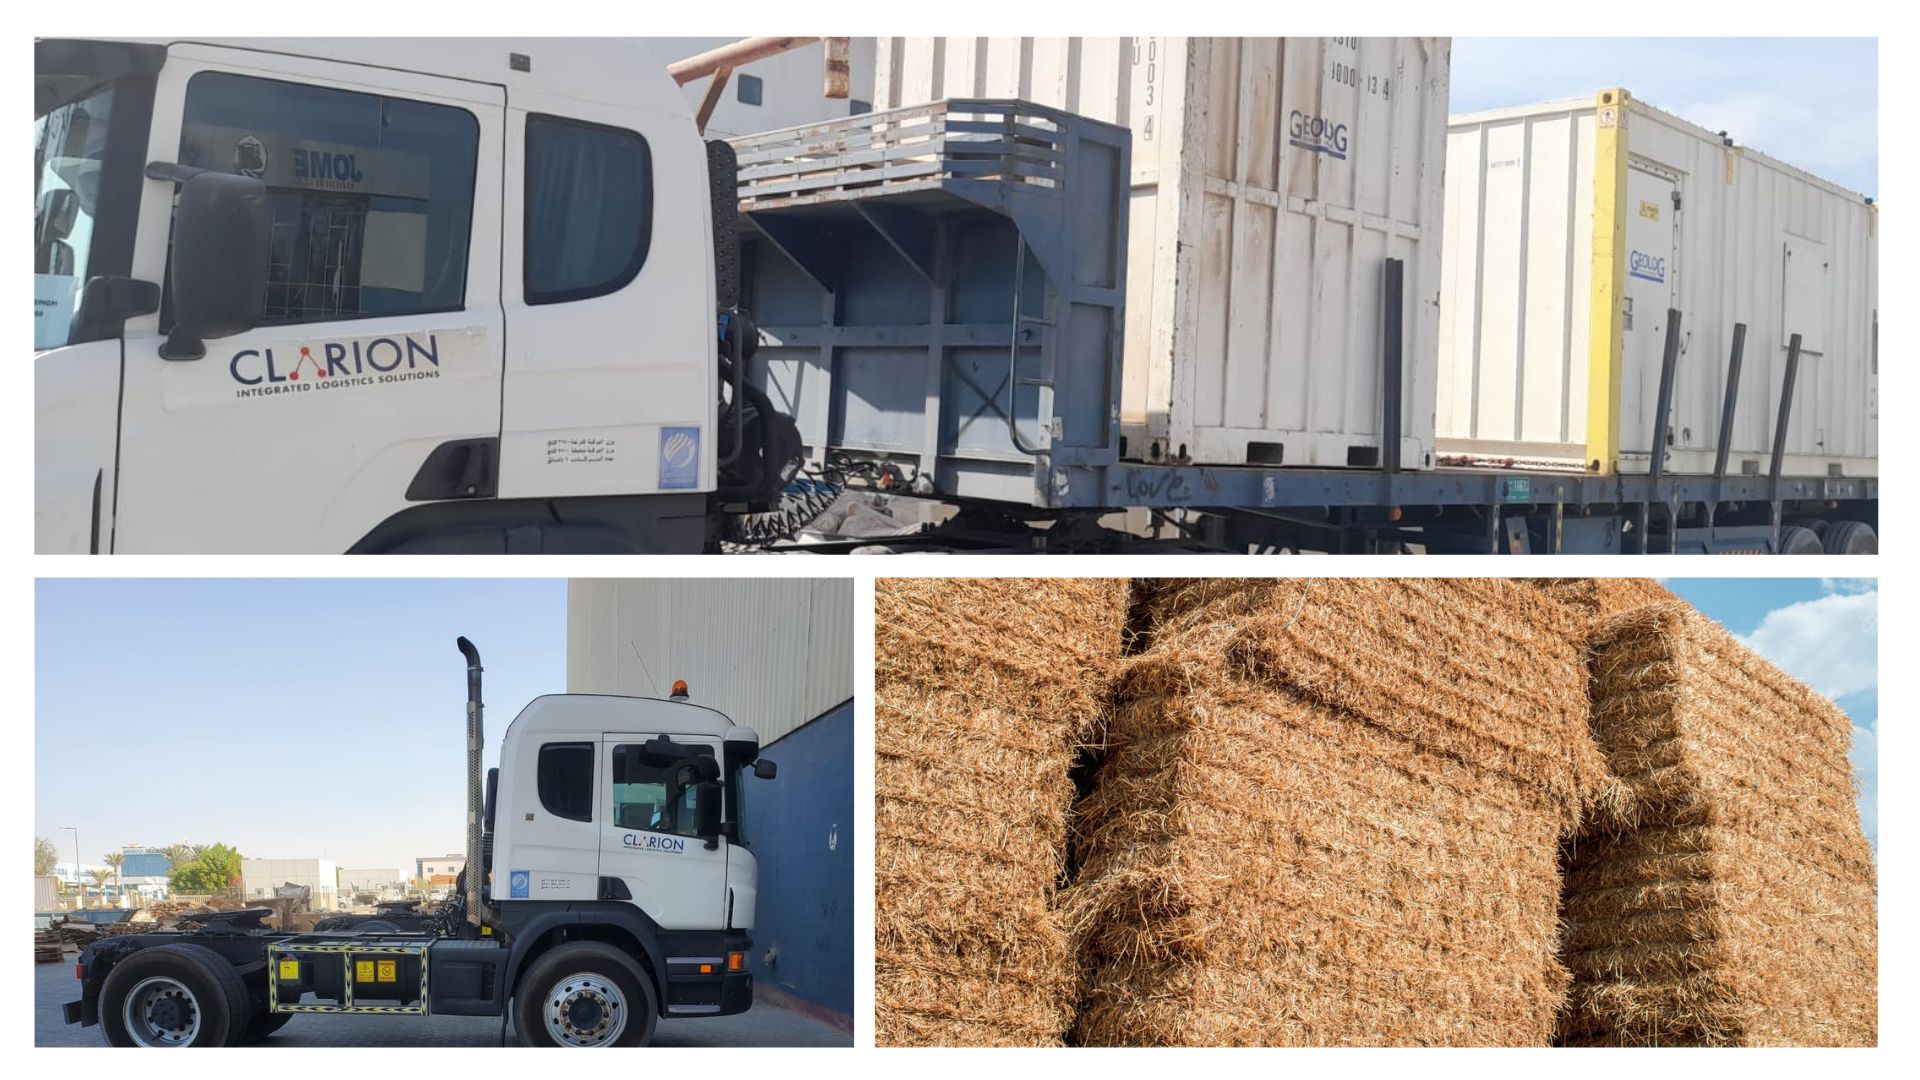 CLARION (UAE) and WTO (Romania) successfully transporting regular lots of Alfalfa